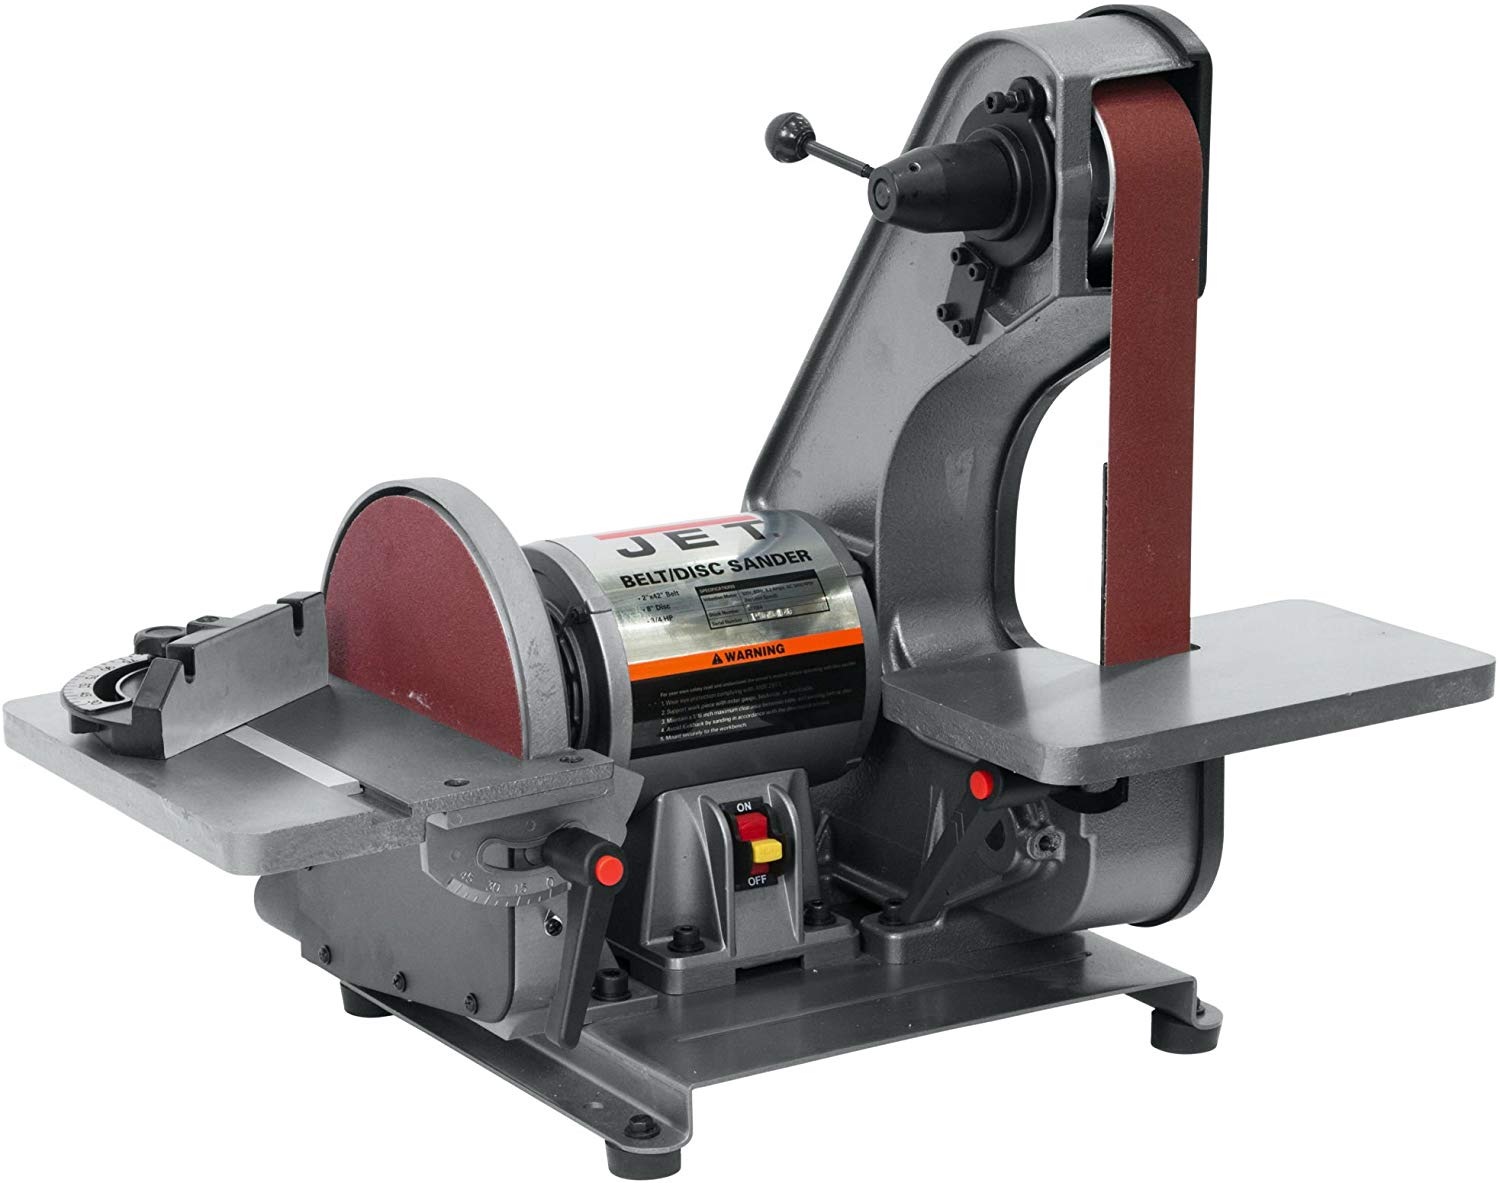 Top 8 Best Bench Sander (2022 Reviews) - Brand Review